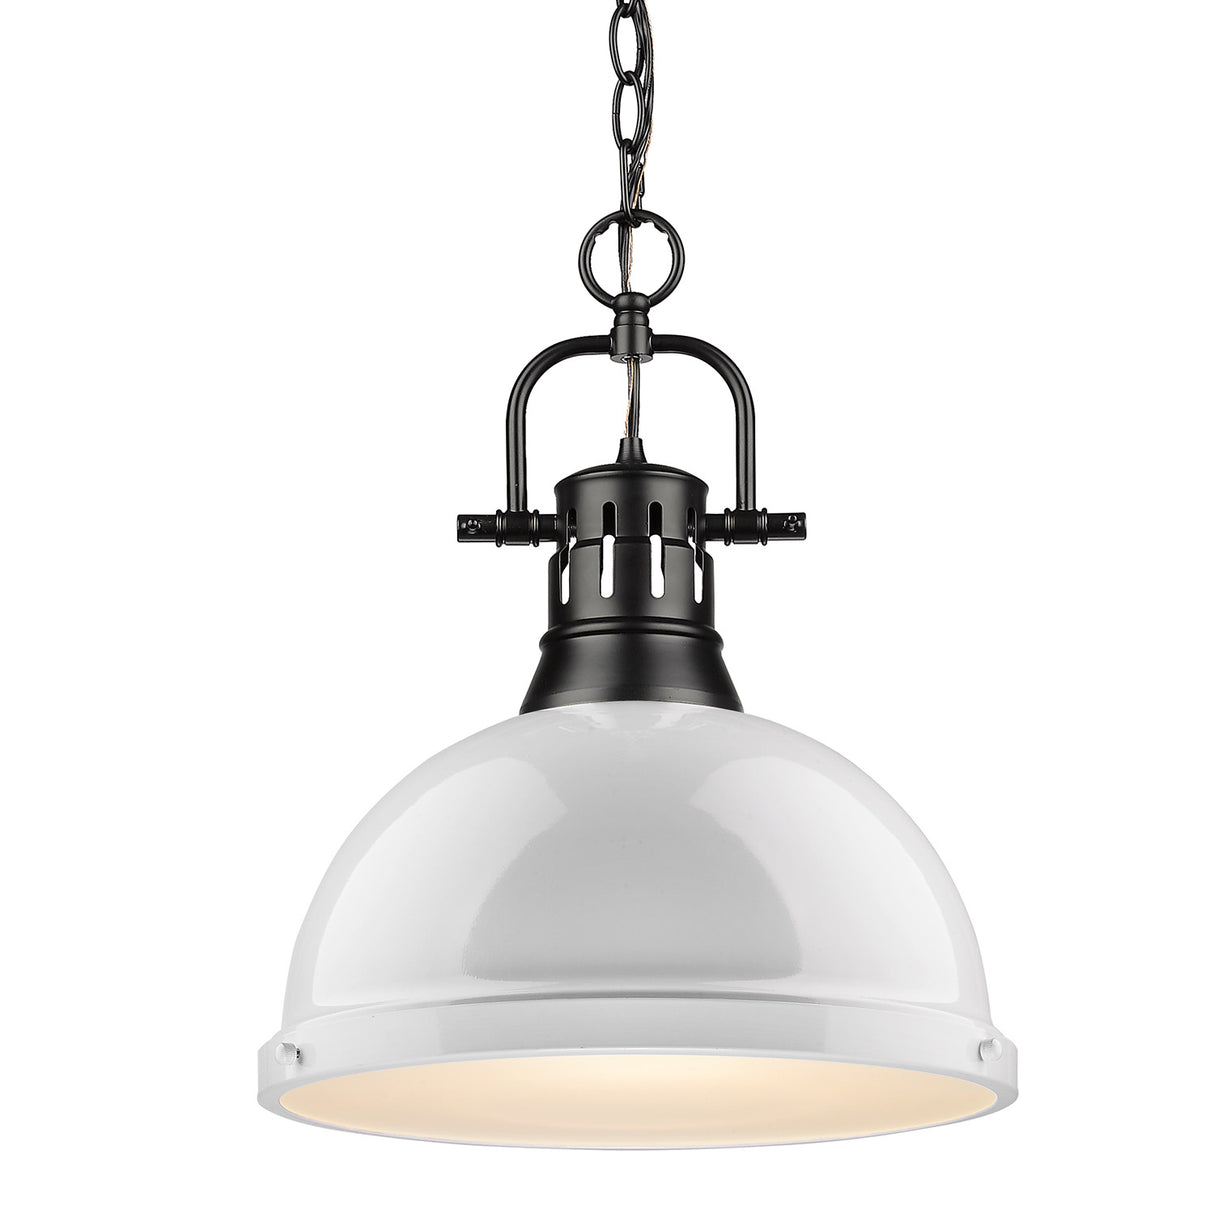 Duncan 1 Light Pendant with Chain in Matte Black with a White Shade